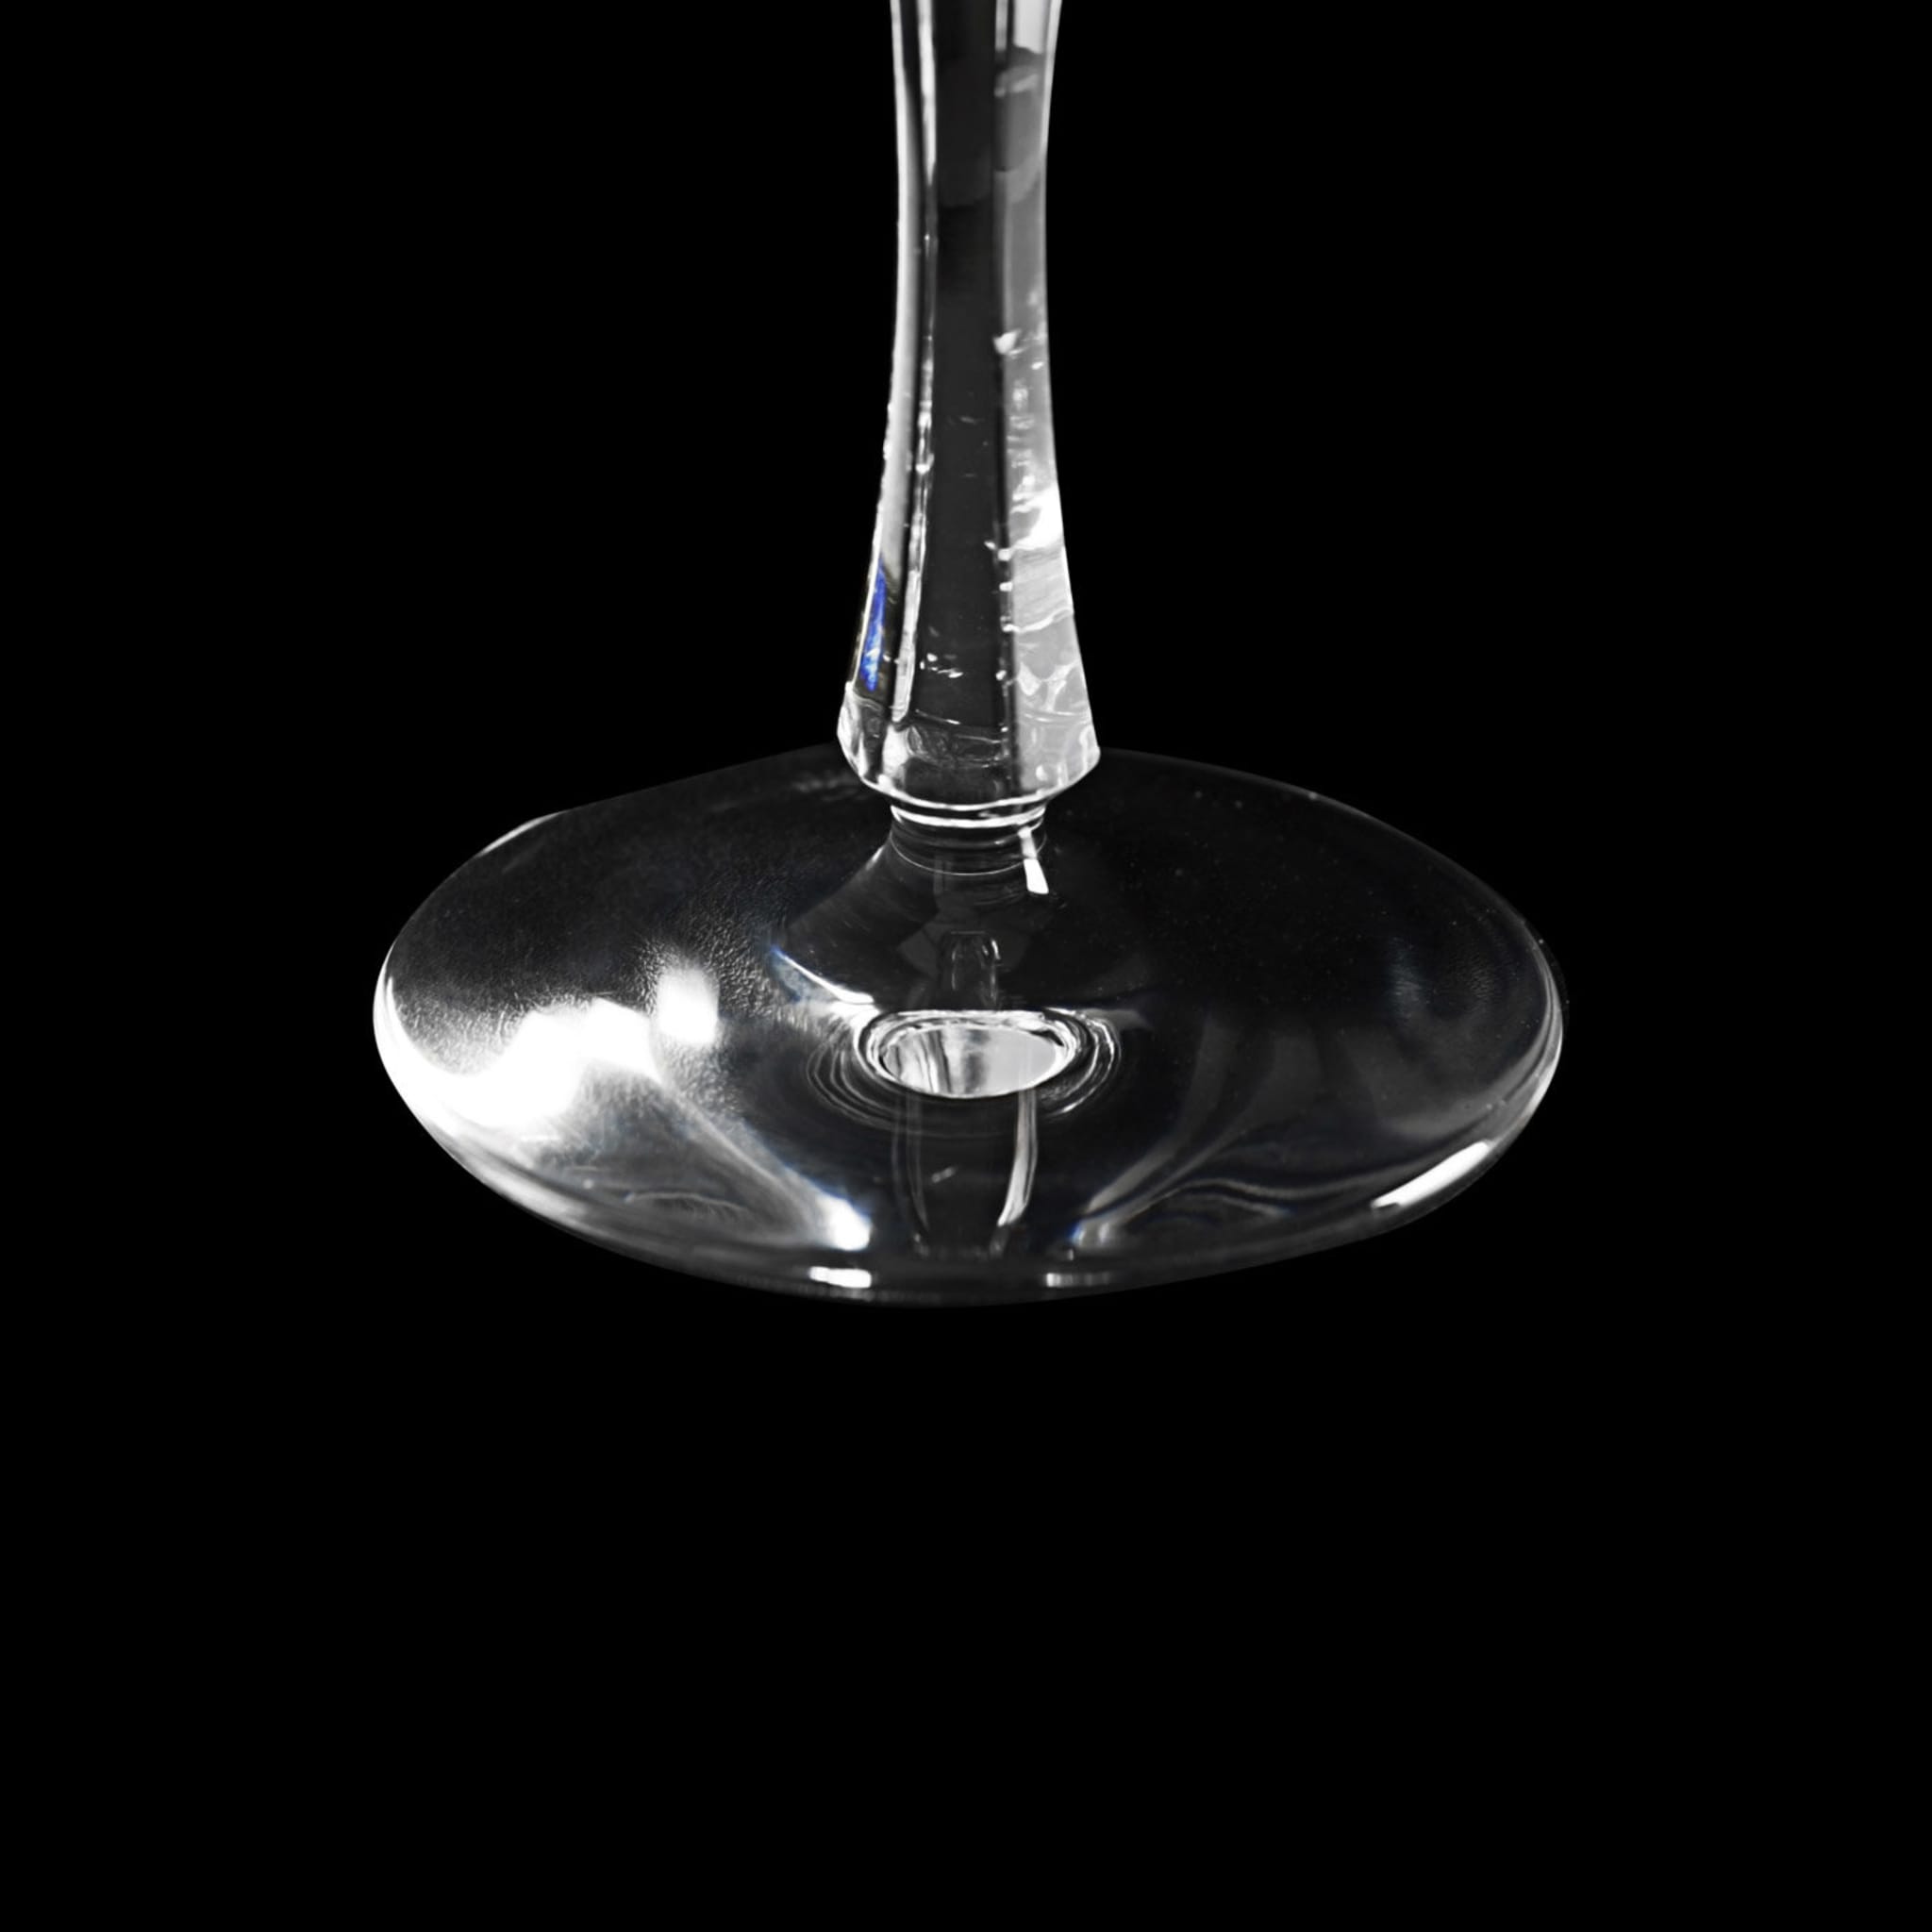 Set of 6 Narciso Crystal Wine Glasses - Alternative view 4